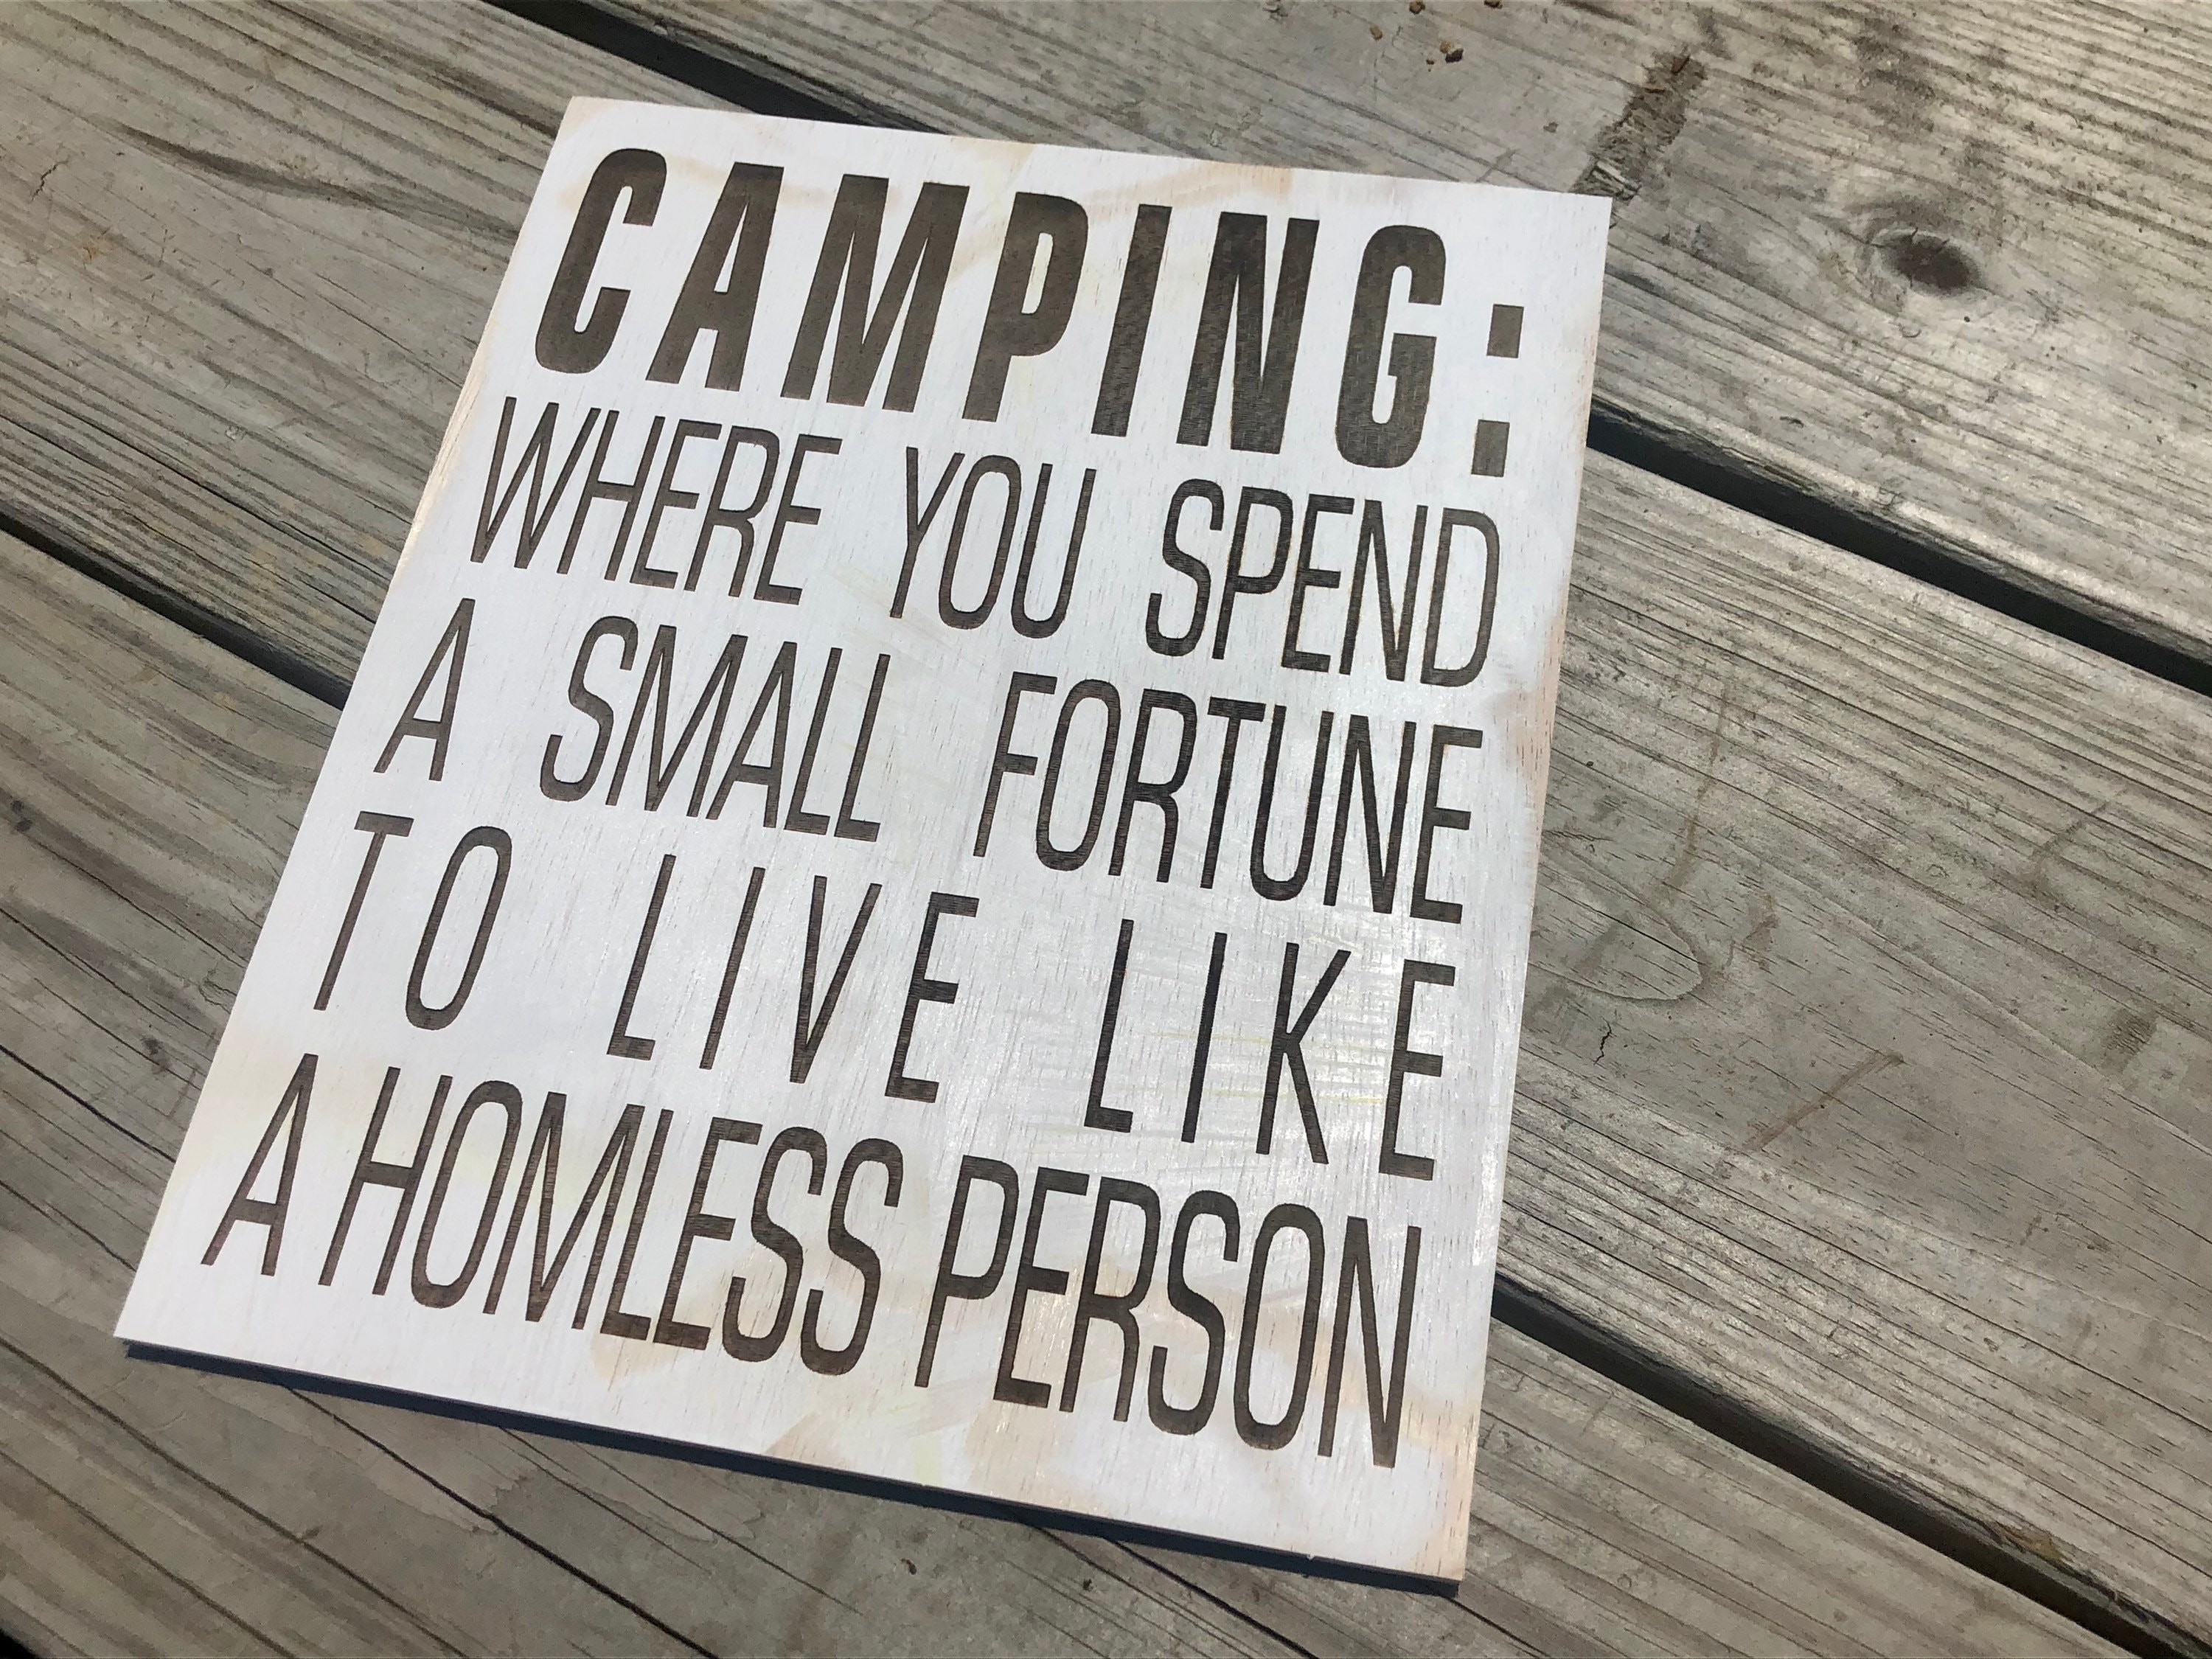 Camping where you spend a small fortune to live like a | Etsy